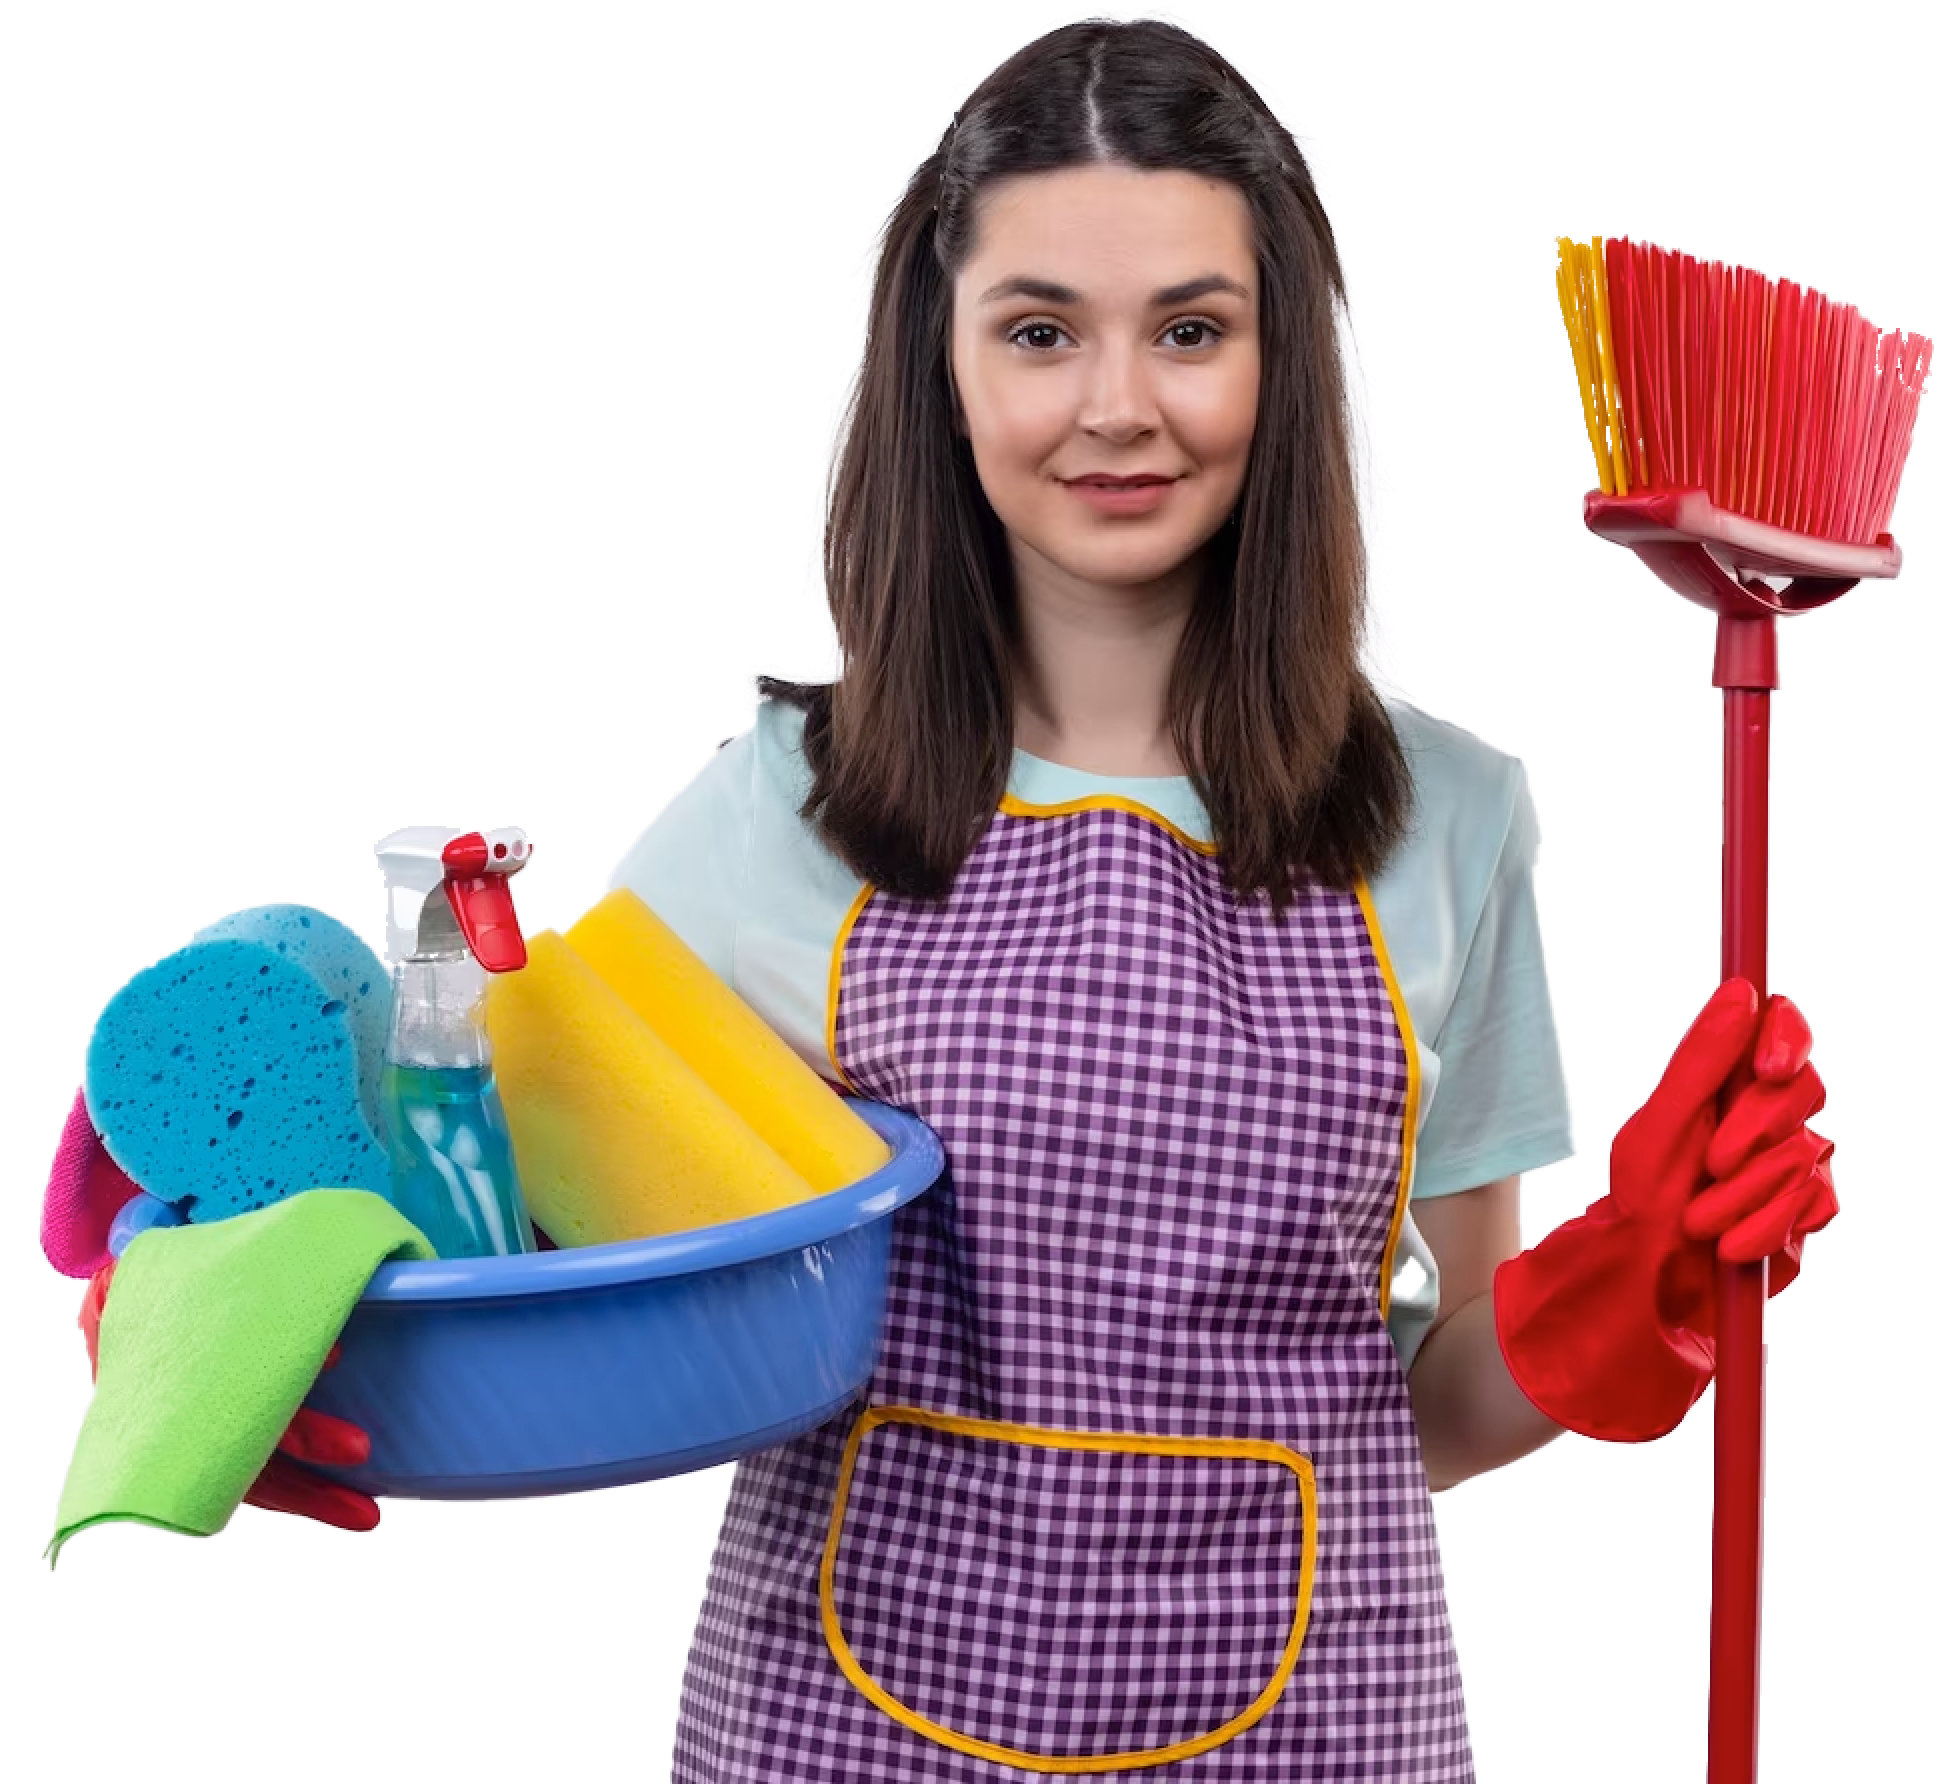 House Keeping